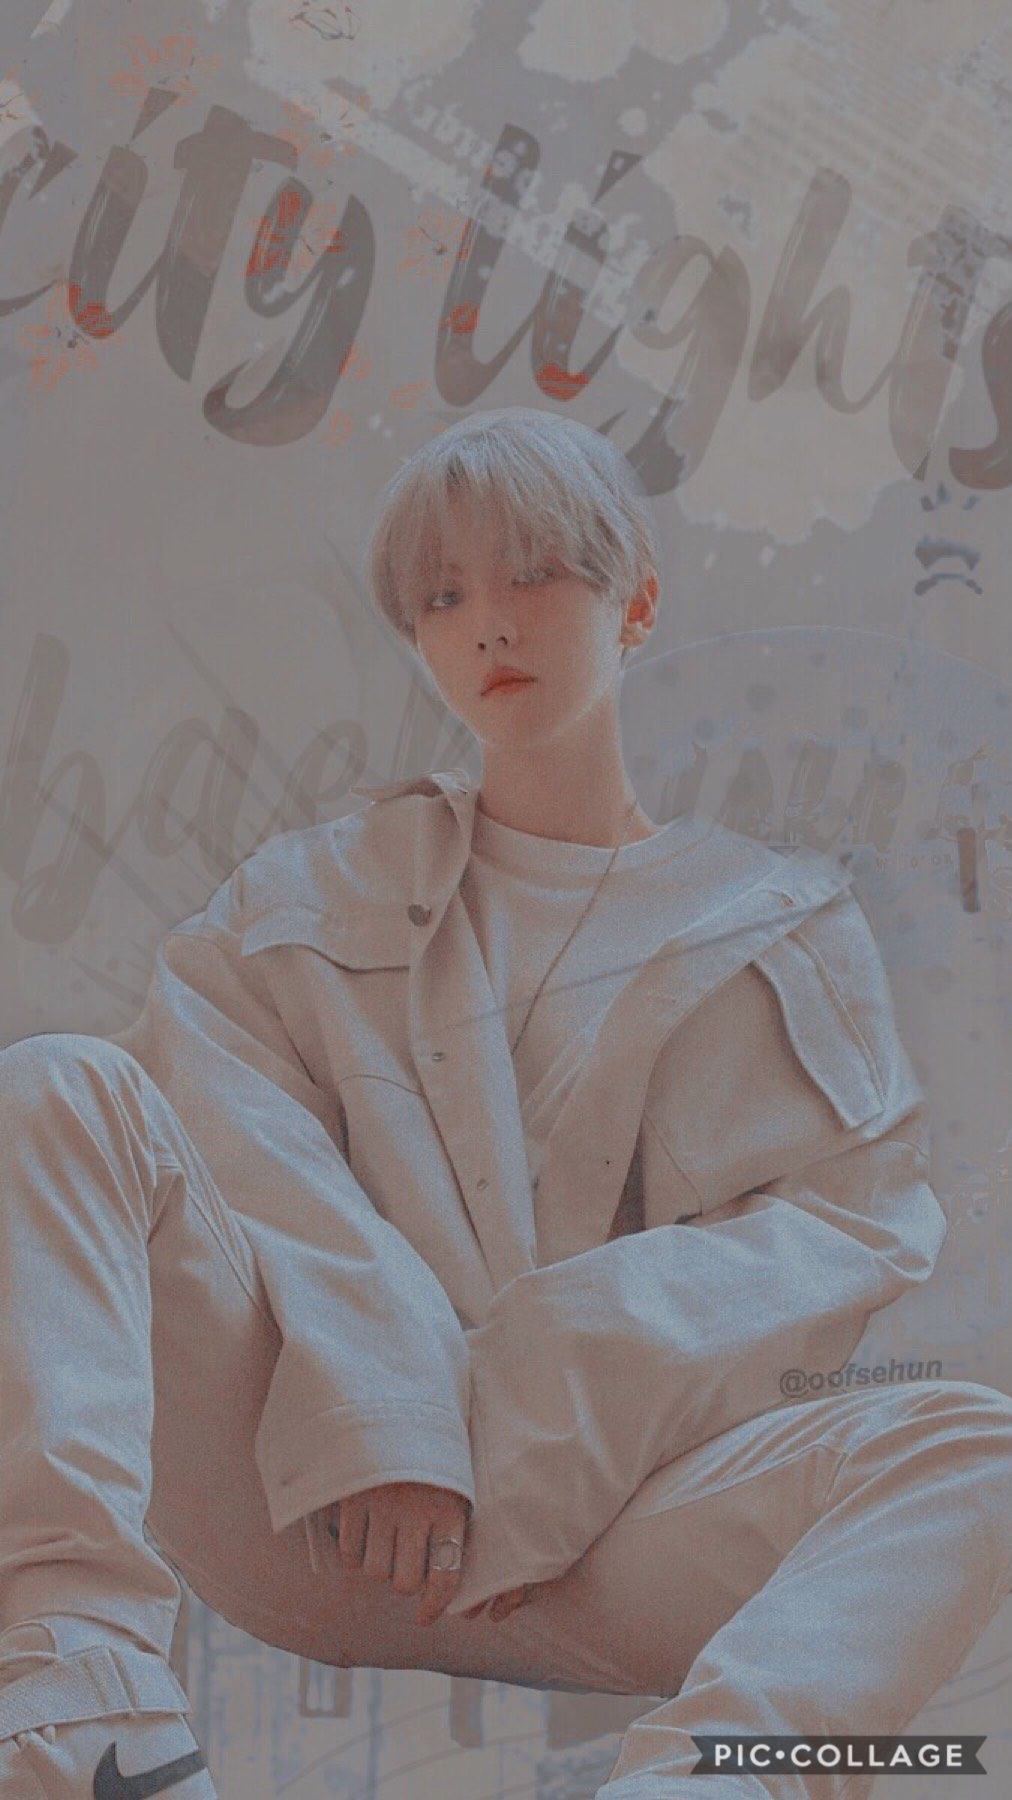 🌙ｃｉｔｙ ｌｉｇｈｔｓ (tap)
new theme!
jk i don’t have a theme and i don’t think i’ll ever have one. the last time i had one, literally the next day i wanted to post other edits with other styles lol
anywayss cITY LIGHTS IS AMAZING
i love baekhyun sm 😔❤️❤️
yALL BE